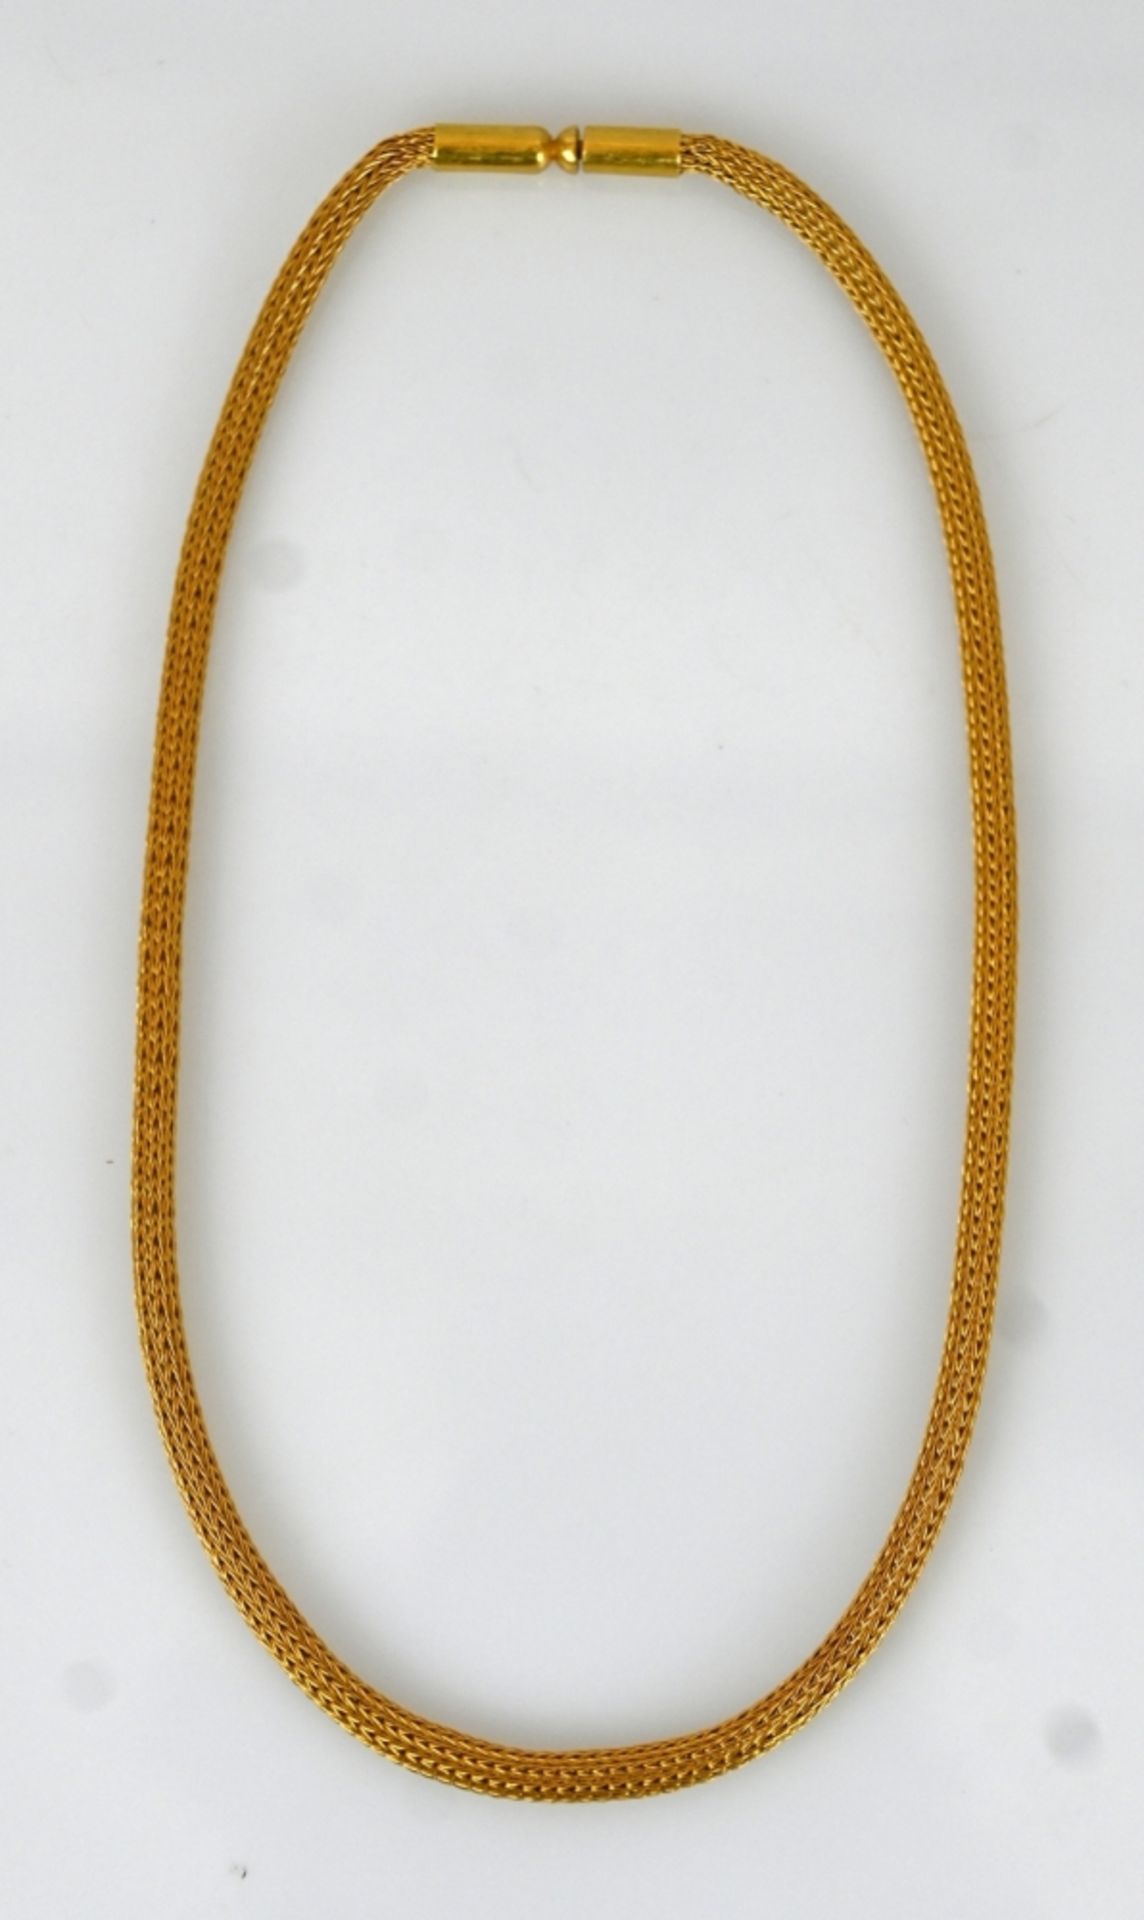 COLLIER mit großer Perle an Kette 21,6ct - Image 3 of 9